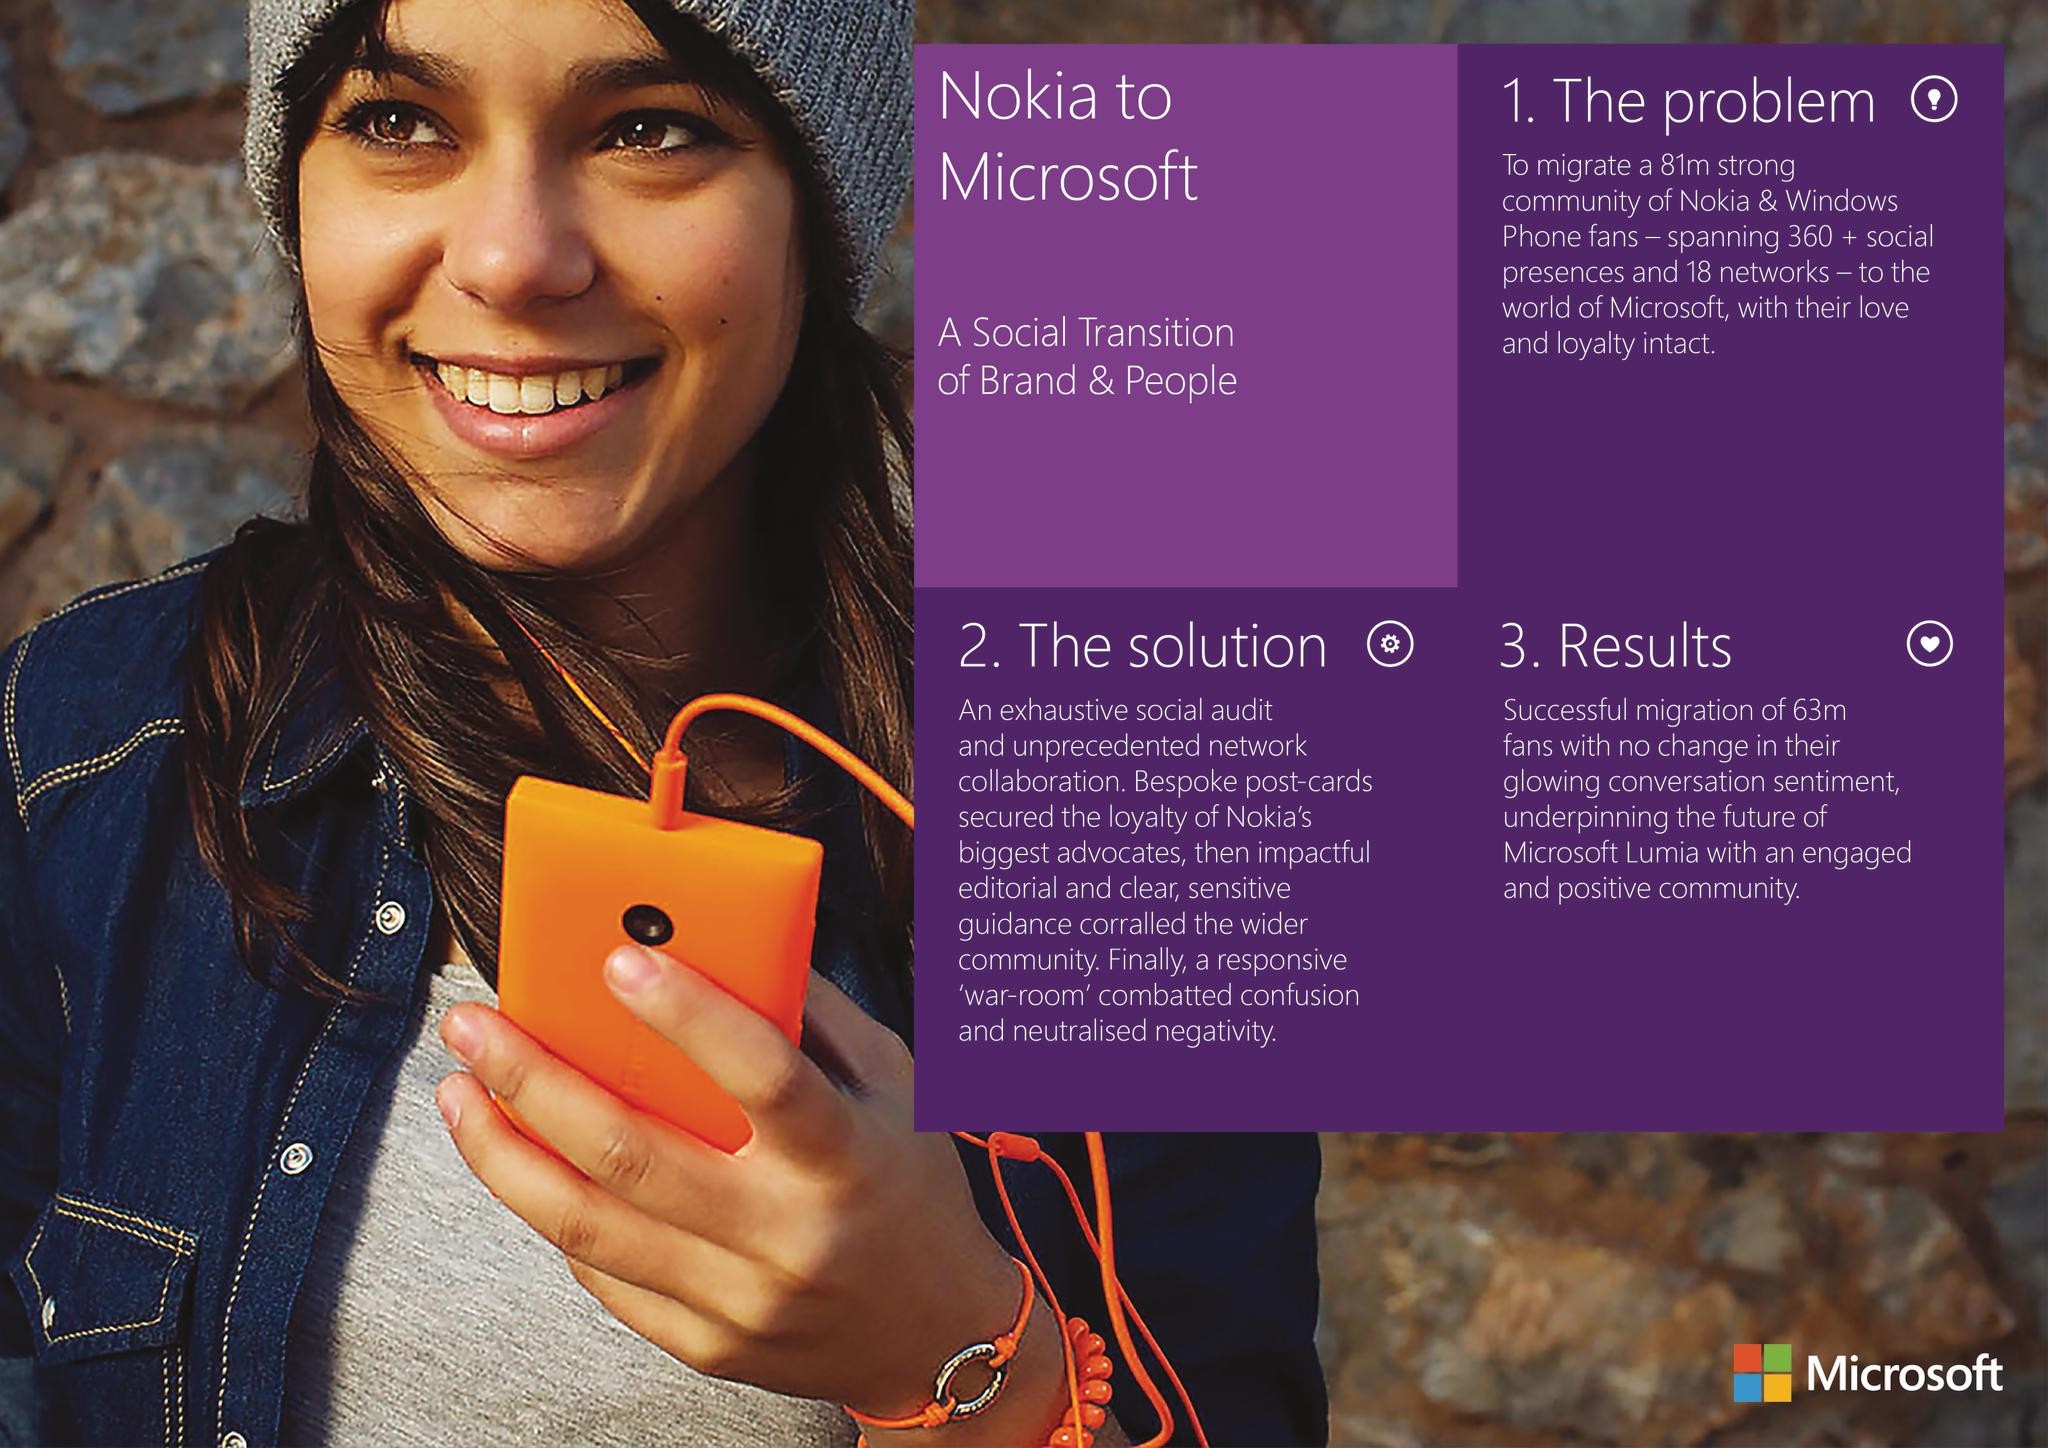 NOKIA TO MICROSOFT: A SOCIAL TRANSITION OF BRAND & PEOPLE